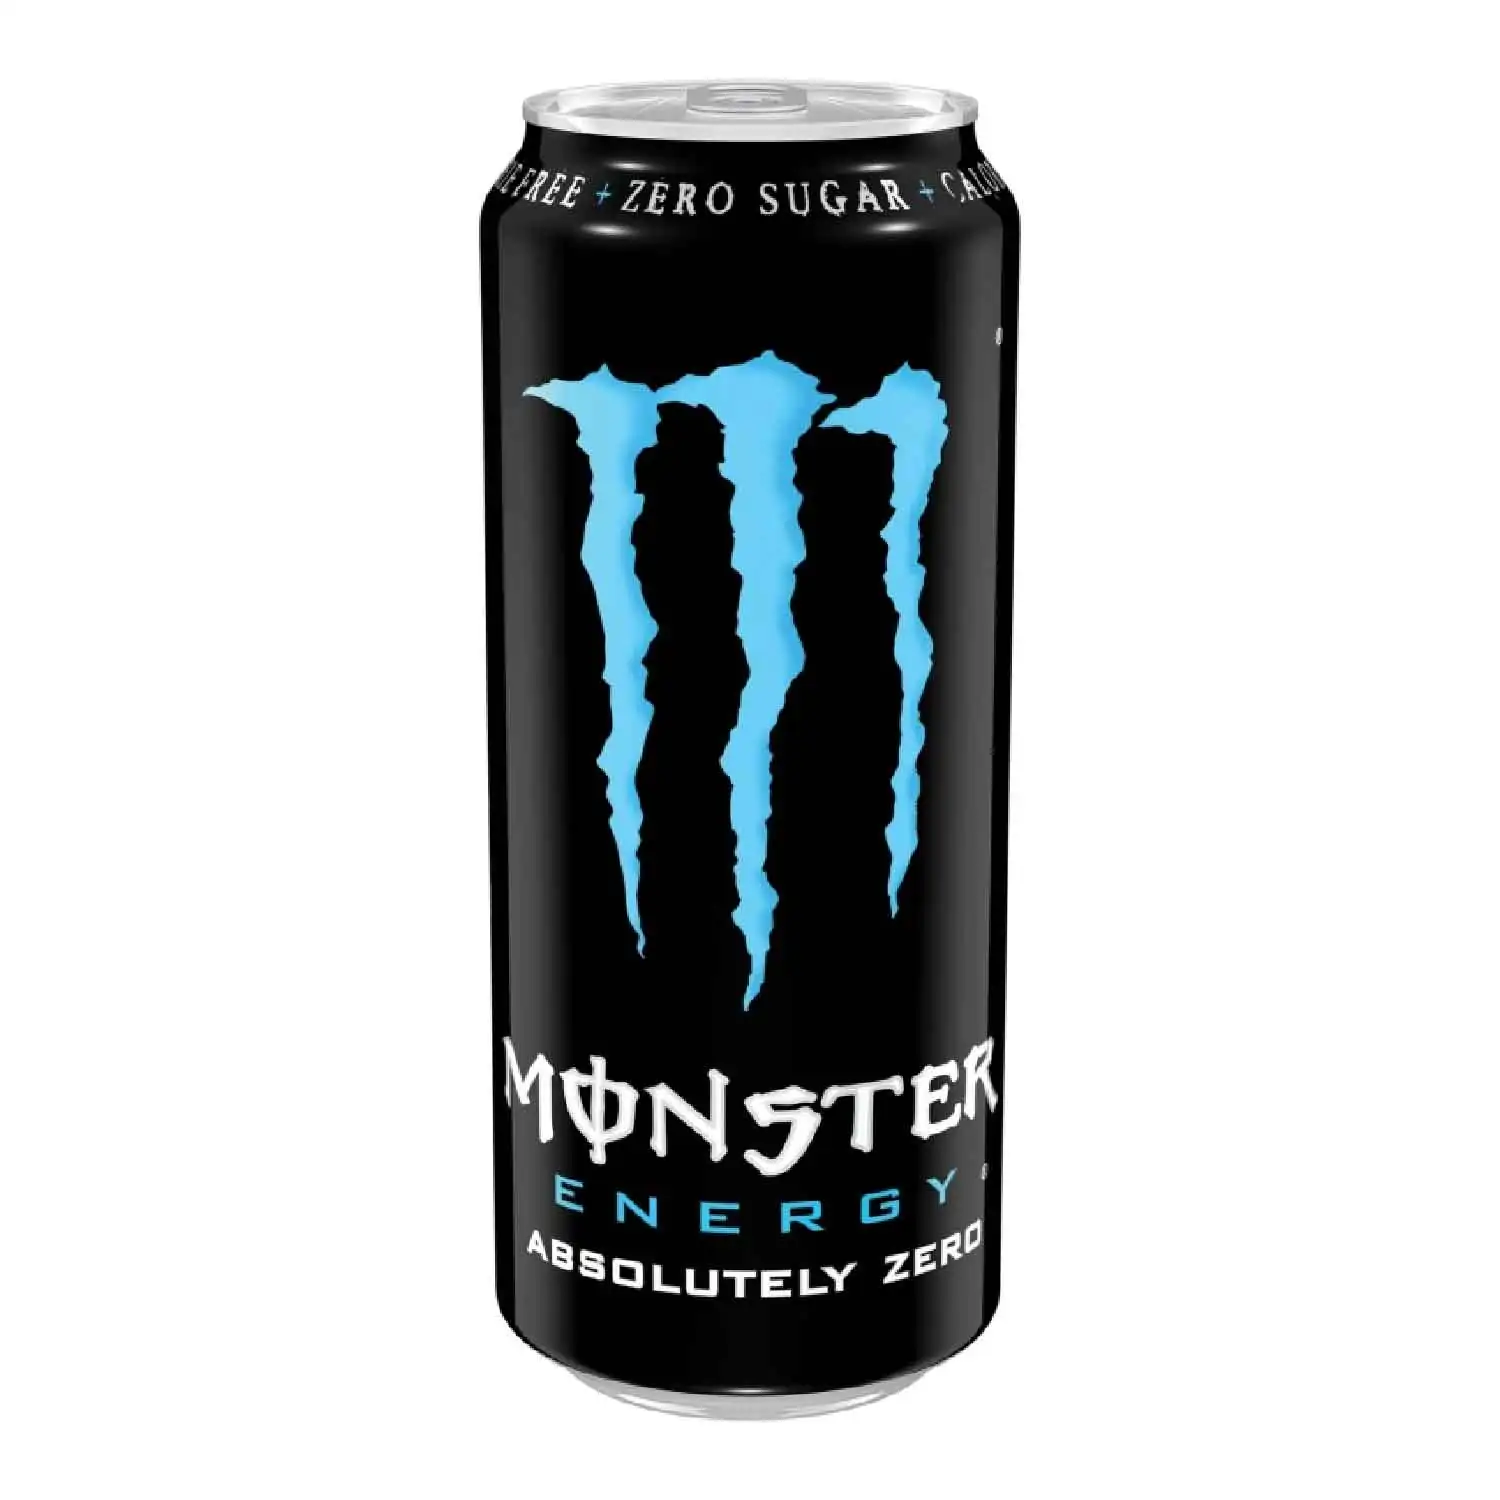 Monster energy absolutely zero 50cl - Buy at Real Tobacco